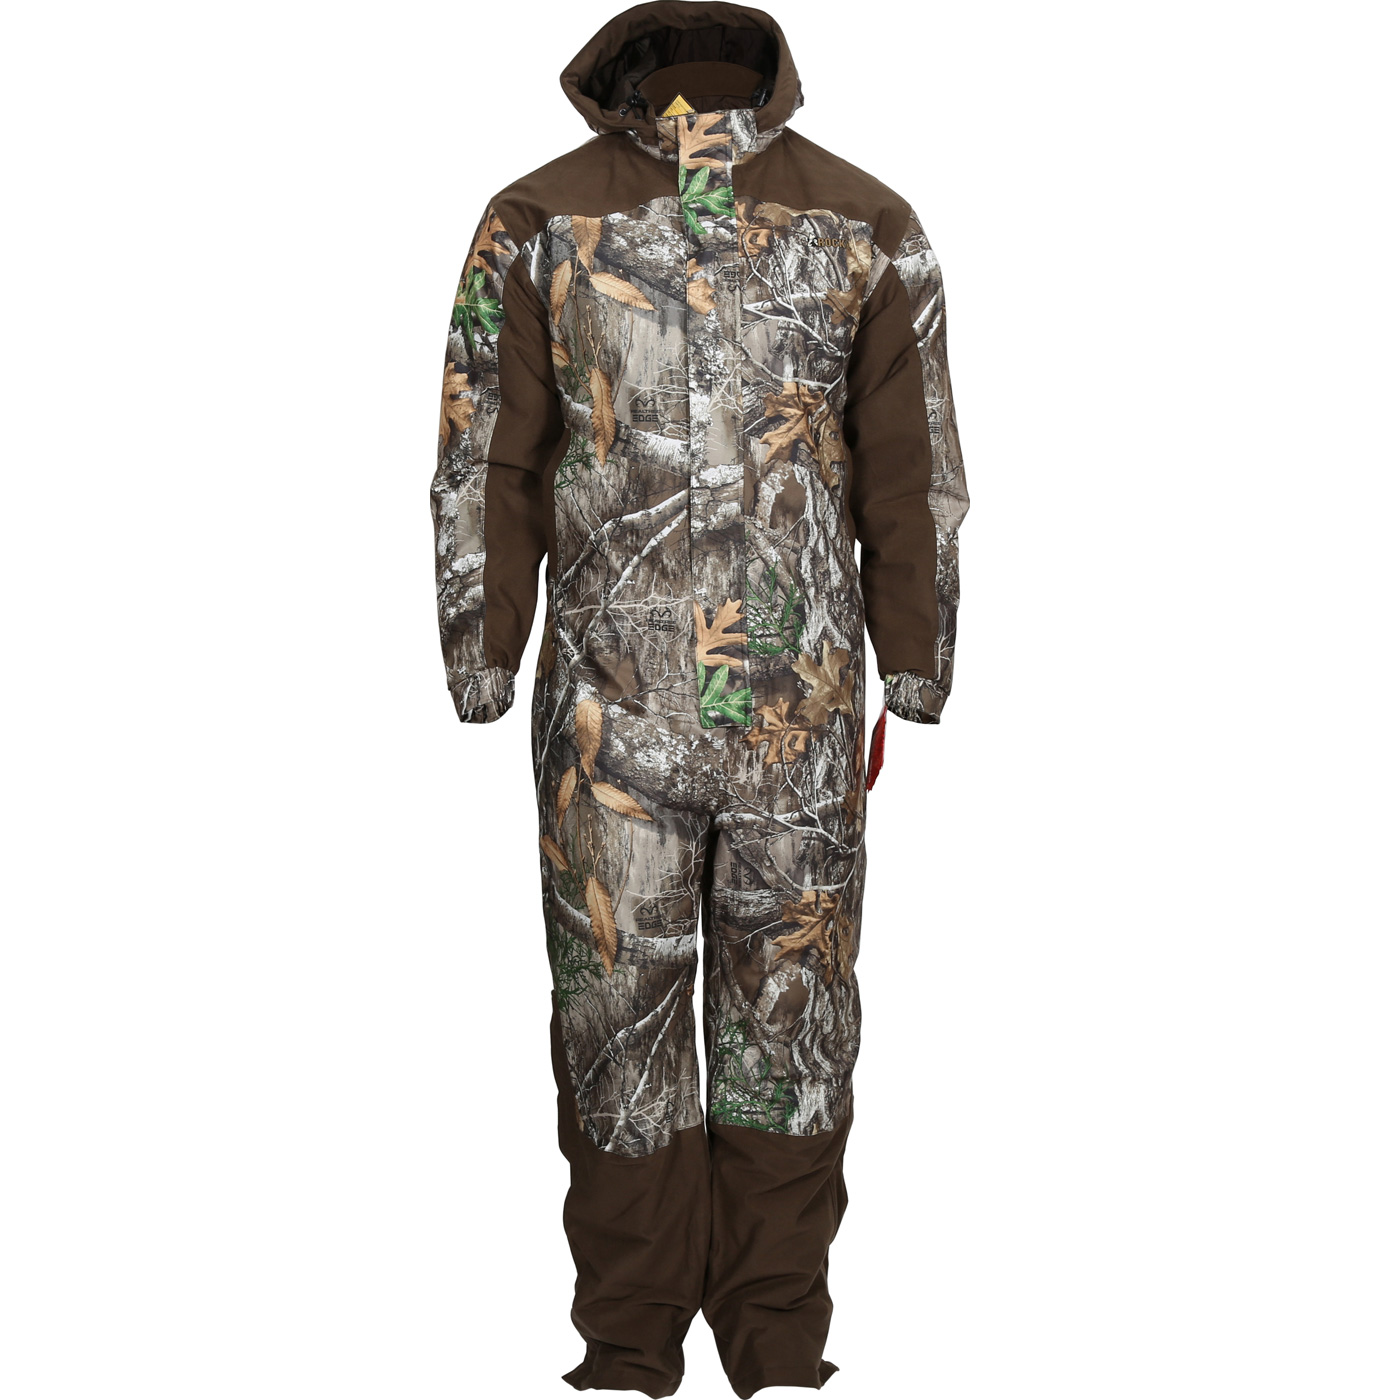 https://www.lehighoutfitters.com/on/demandware.static/-/Sites-Master-Product-catalog-en/default/dw897721fa/images/HW00196RTE_EXTRALARGE.jpg